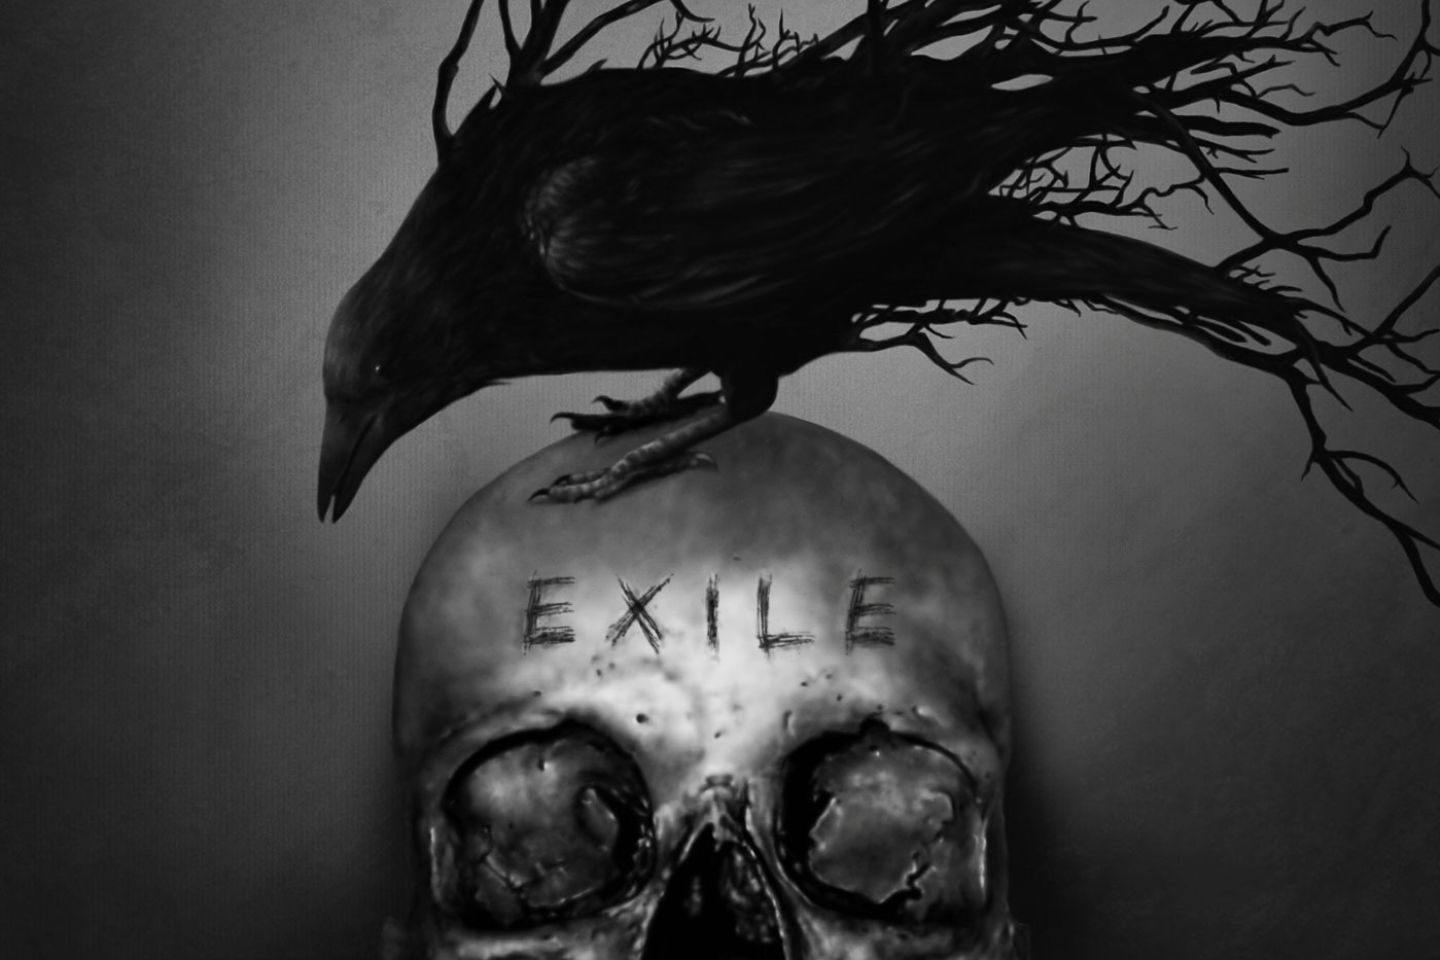 The Raven Age “Exile” (EX1 Records, 2021)